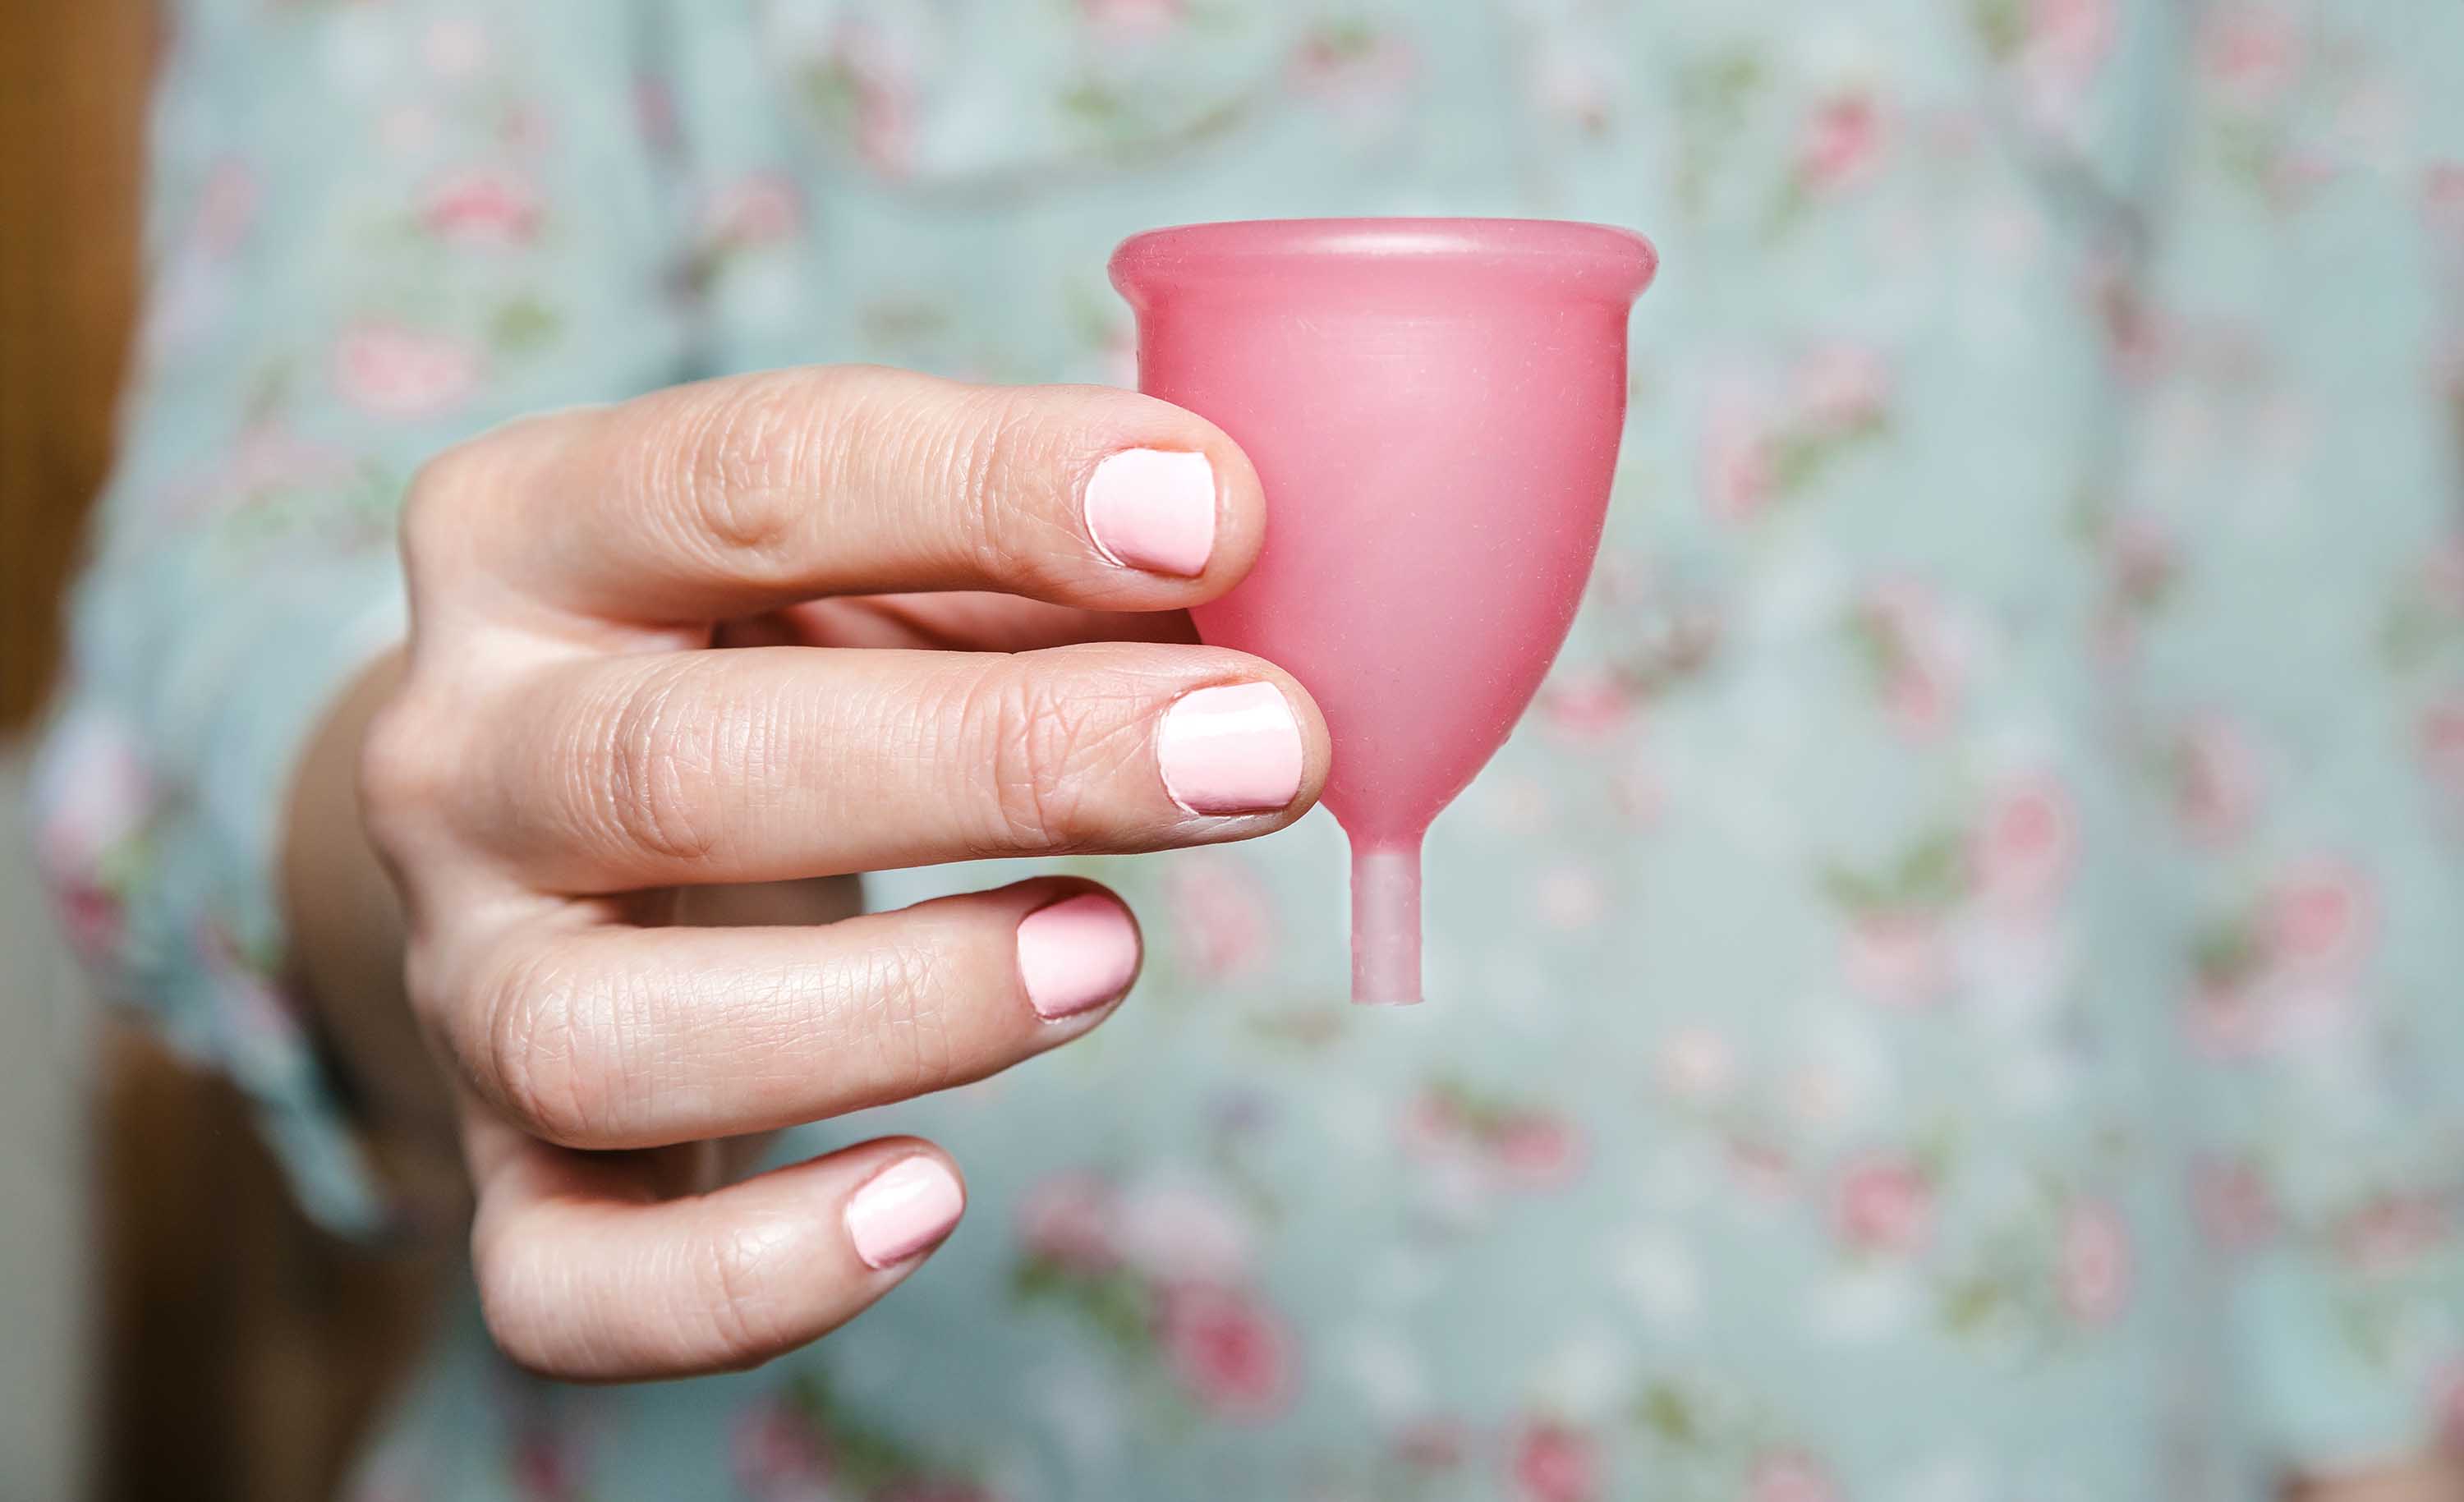 Why I Switched From Tampons to Menstrual Cups for My Period